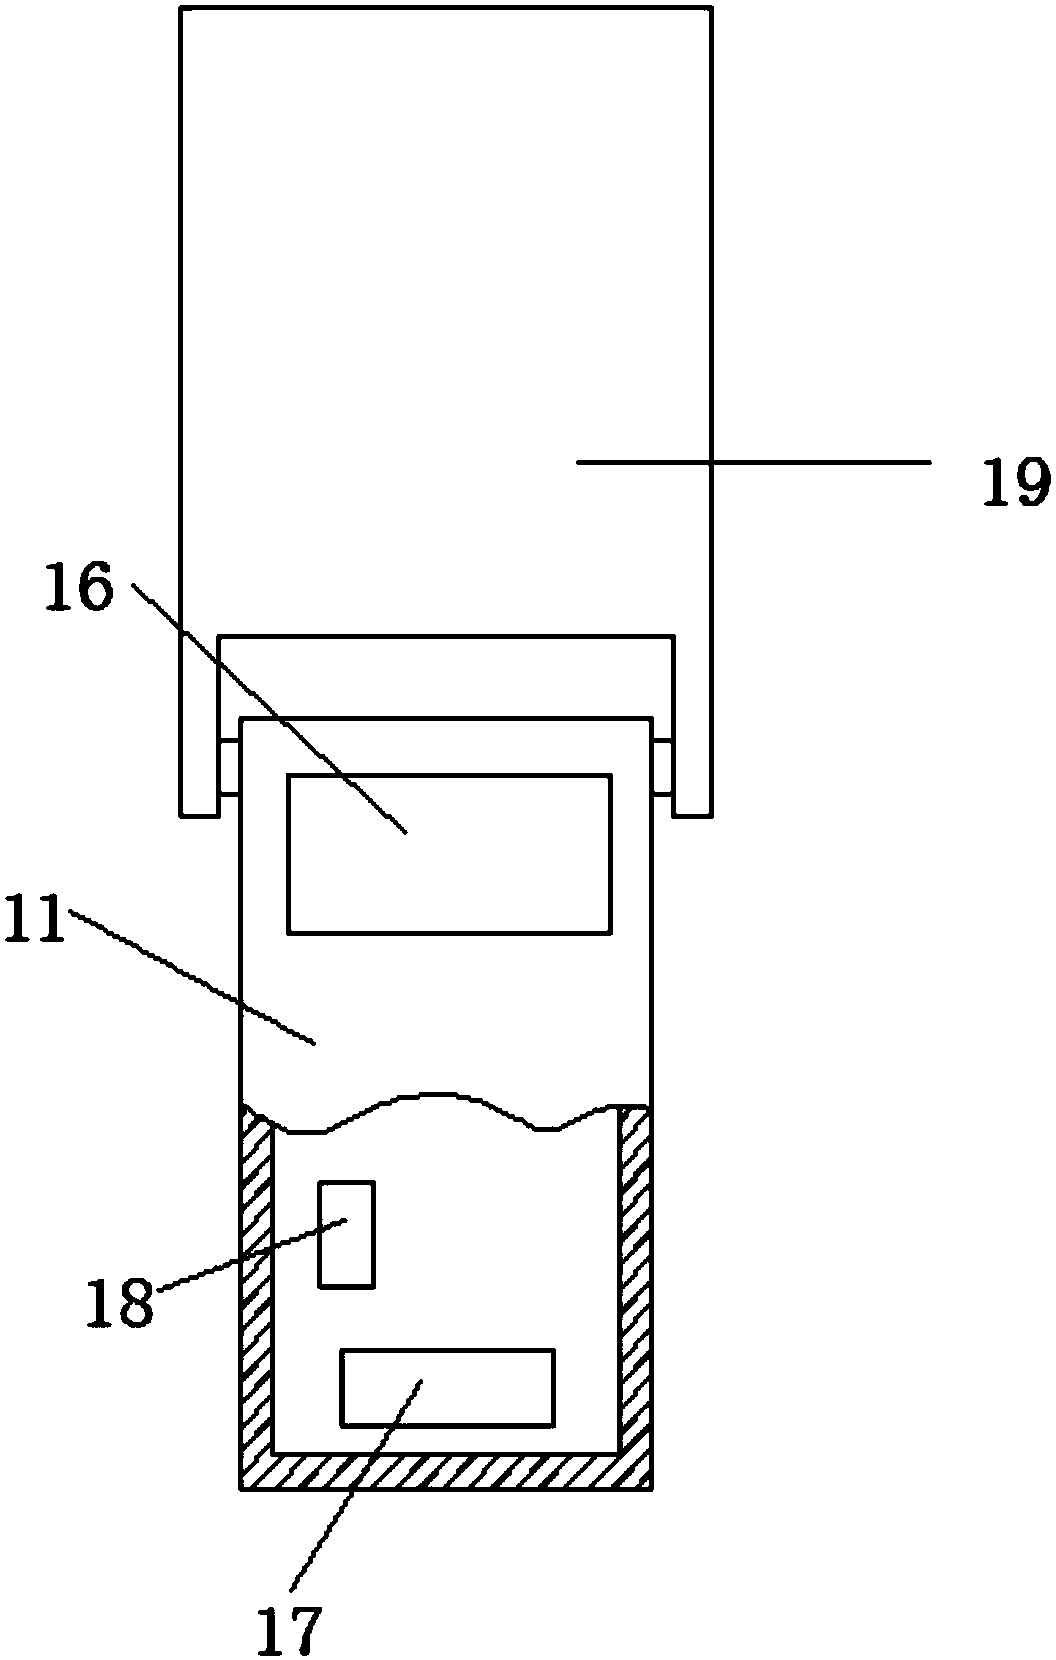 Construction engineering multi-angle mapping instrument based on Rotating shaft